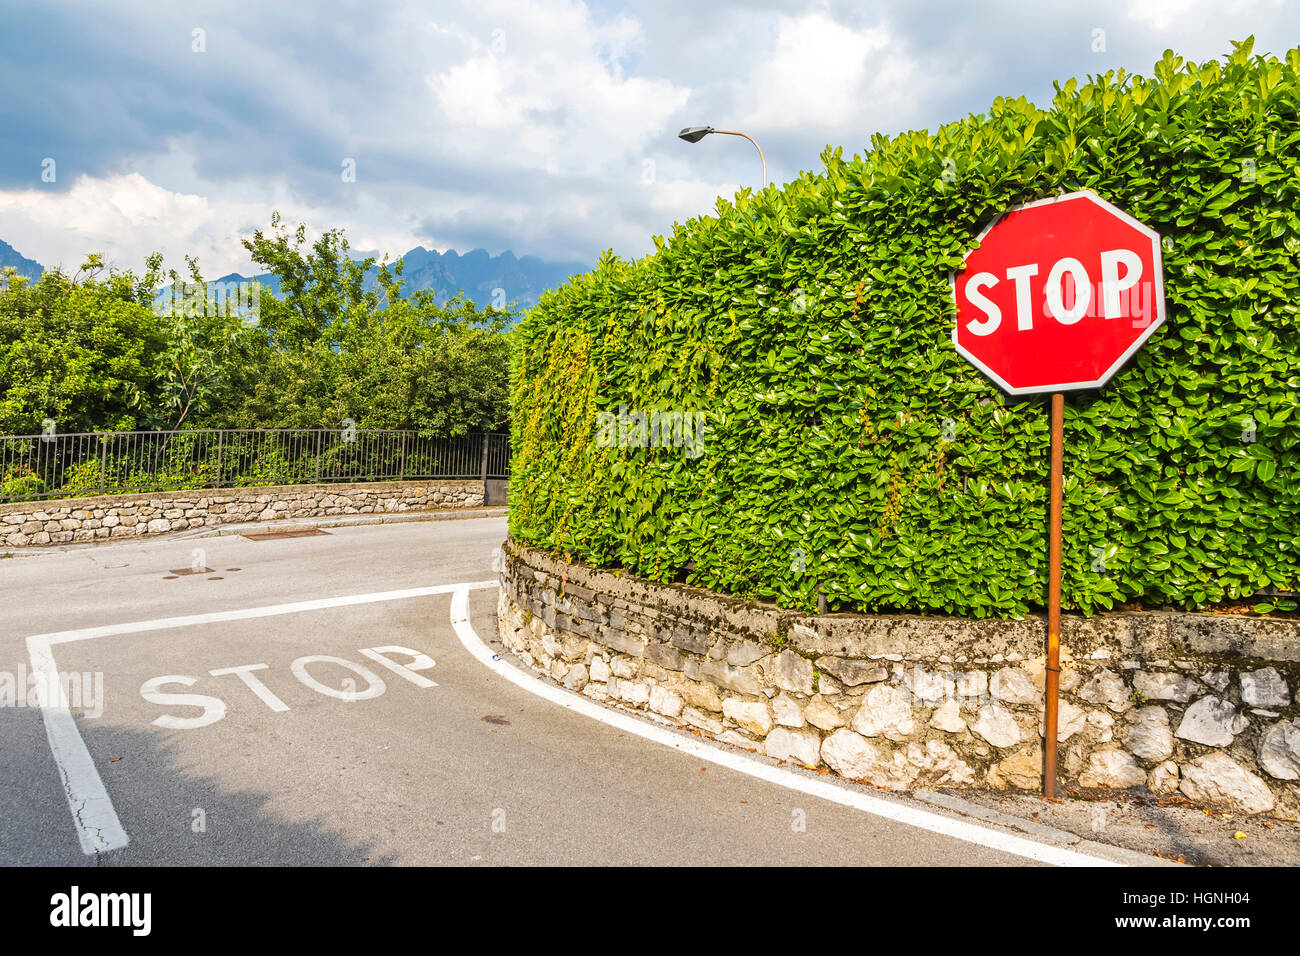 Crossroad with Stop symbol painted on asphalt and red hexagonal Stop sign on metal pole. Rural road next to Como city, Italy Stock Photo